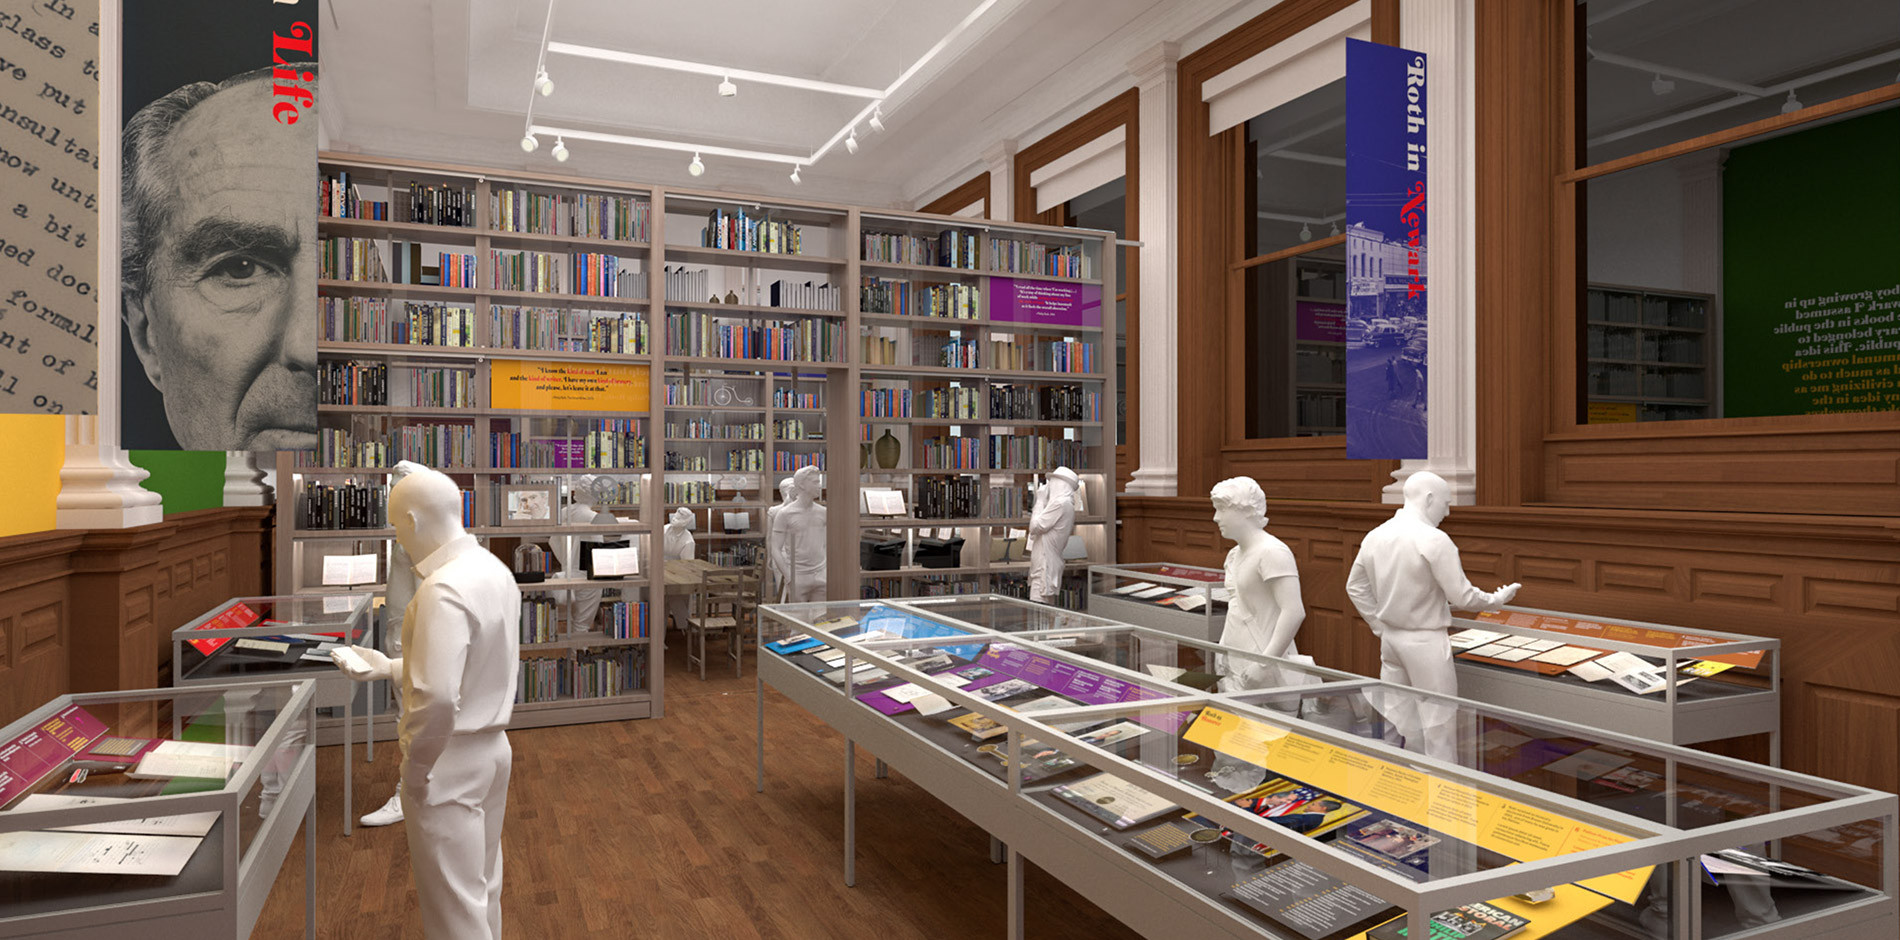 Renovation to Newark Public Library Creating Historic Philip Roth Room